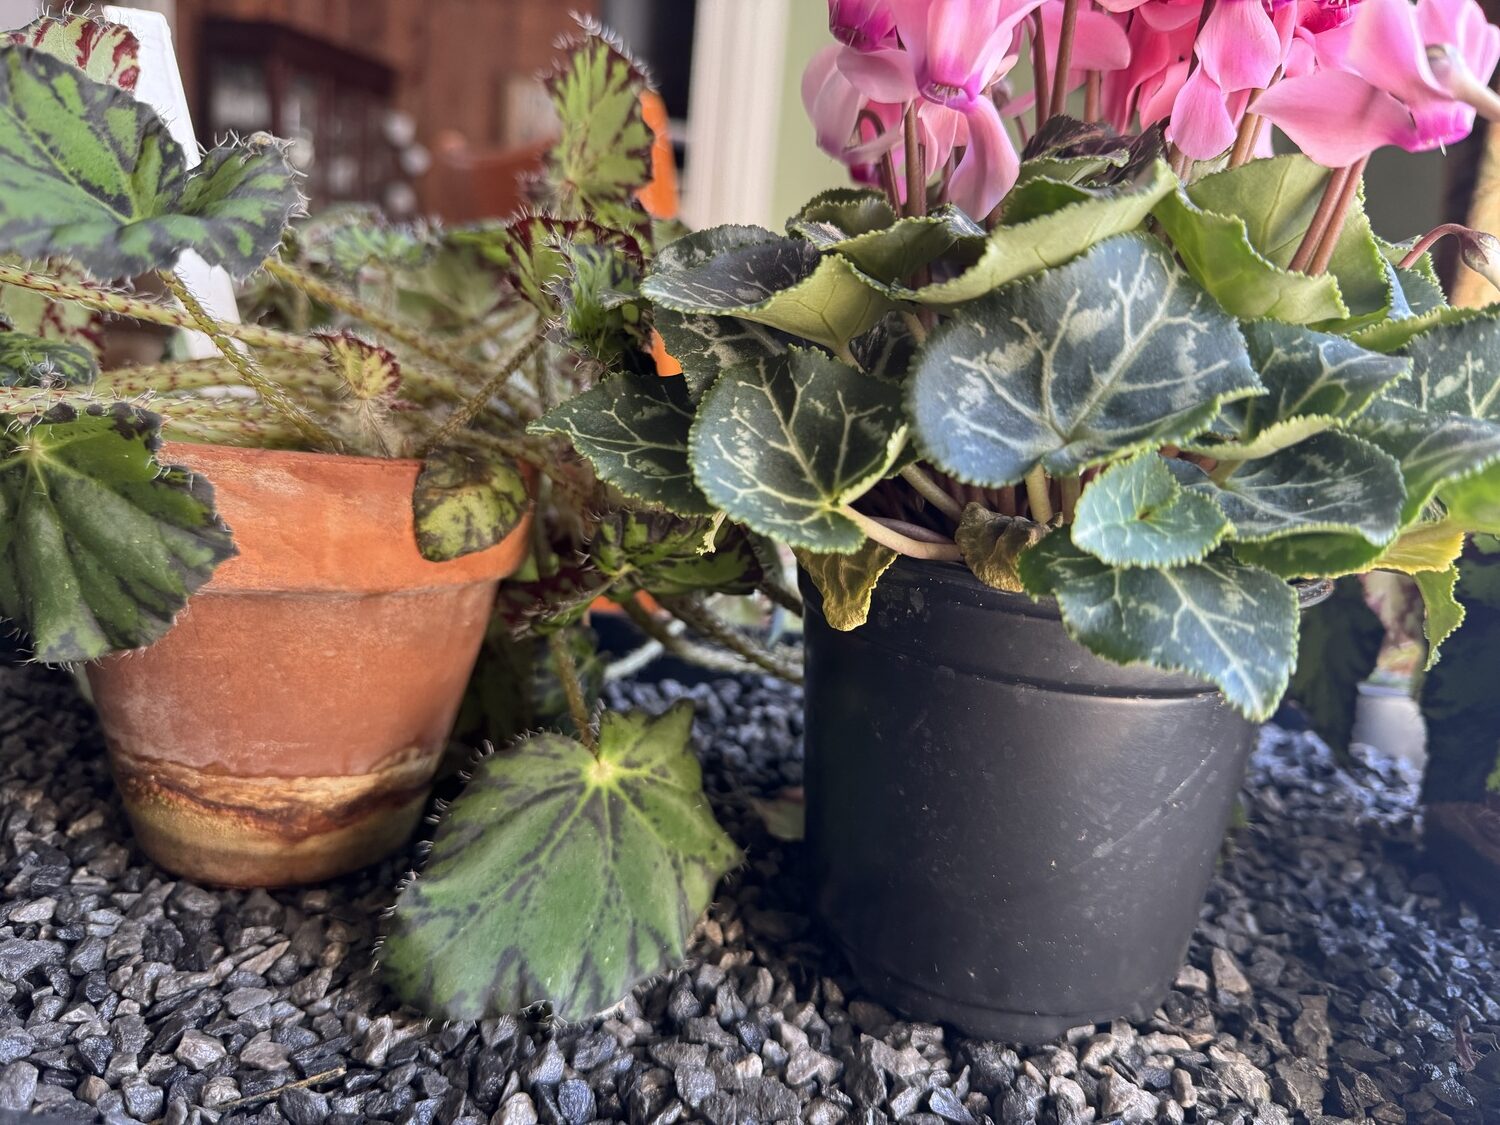 The clay pot on the left allows this Begonia’s roots to 